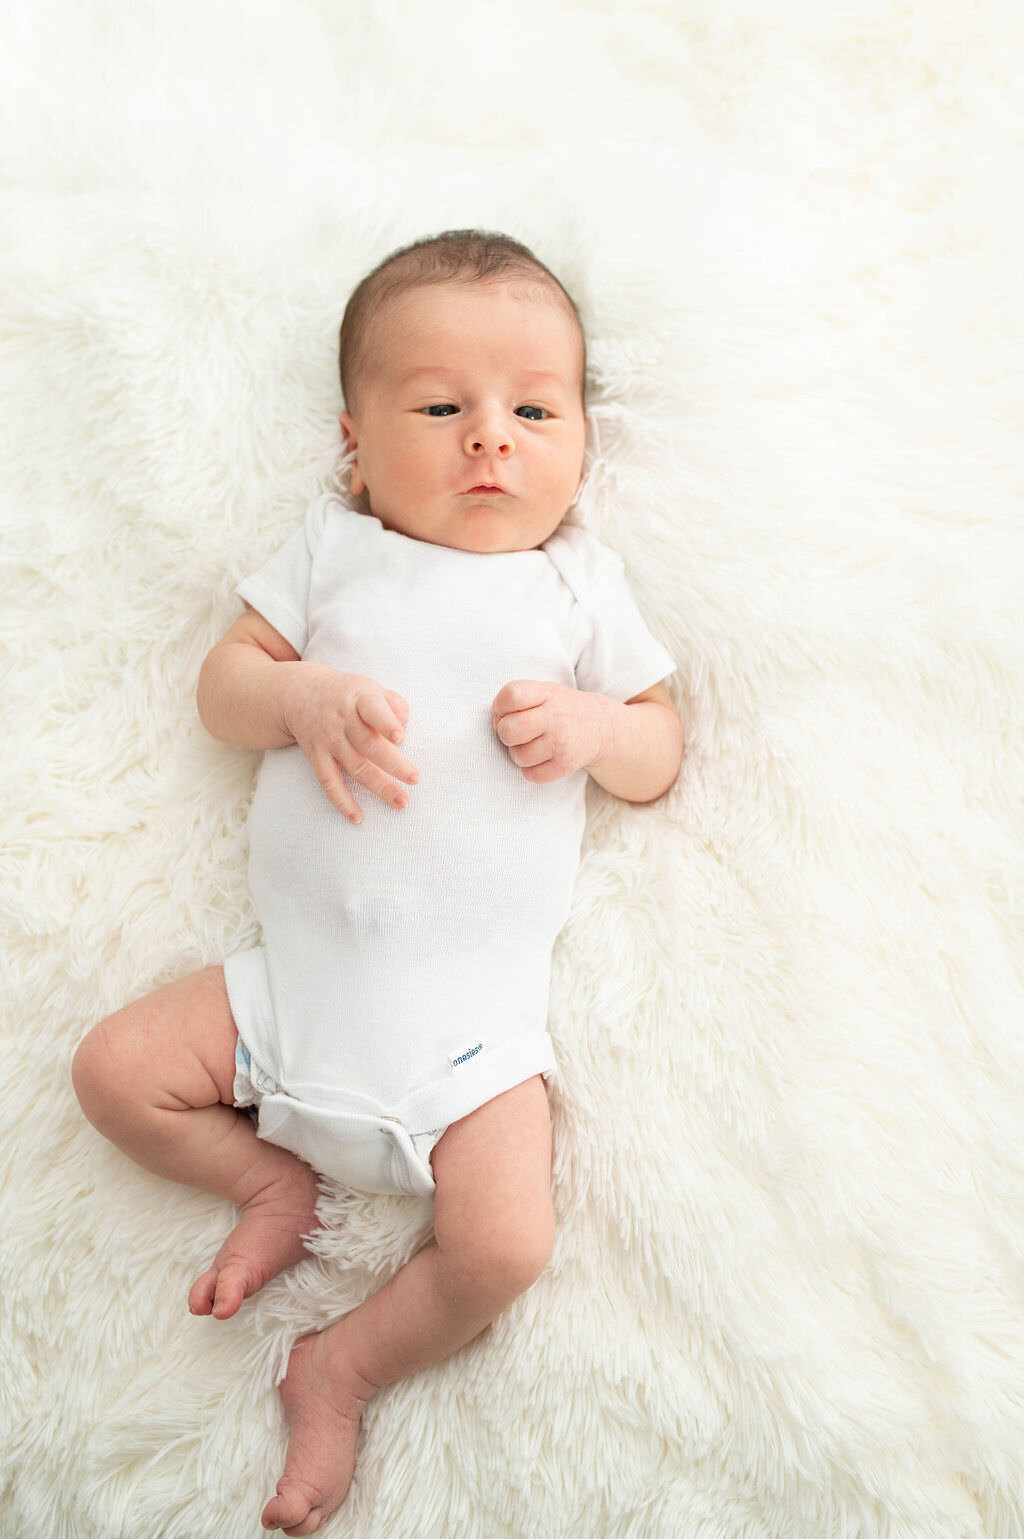 A newborn baby in a onesie laying on a blanket.